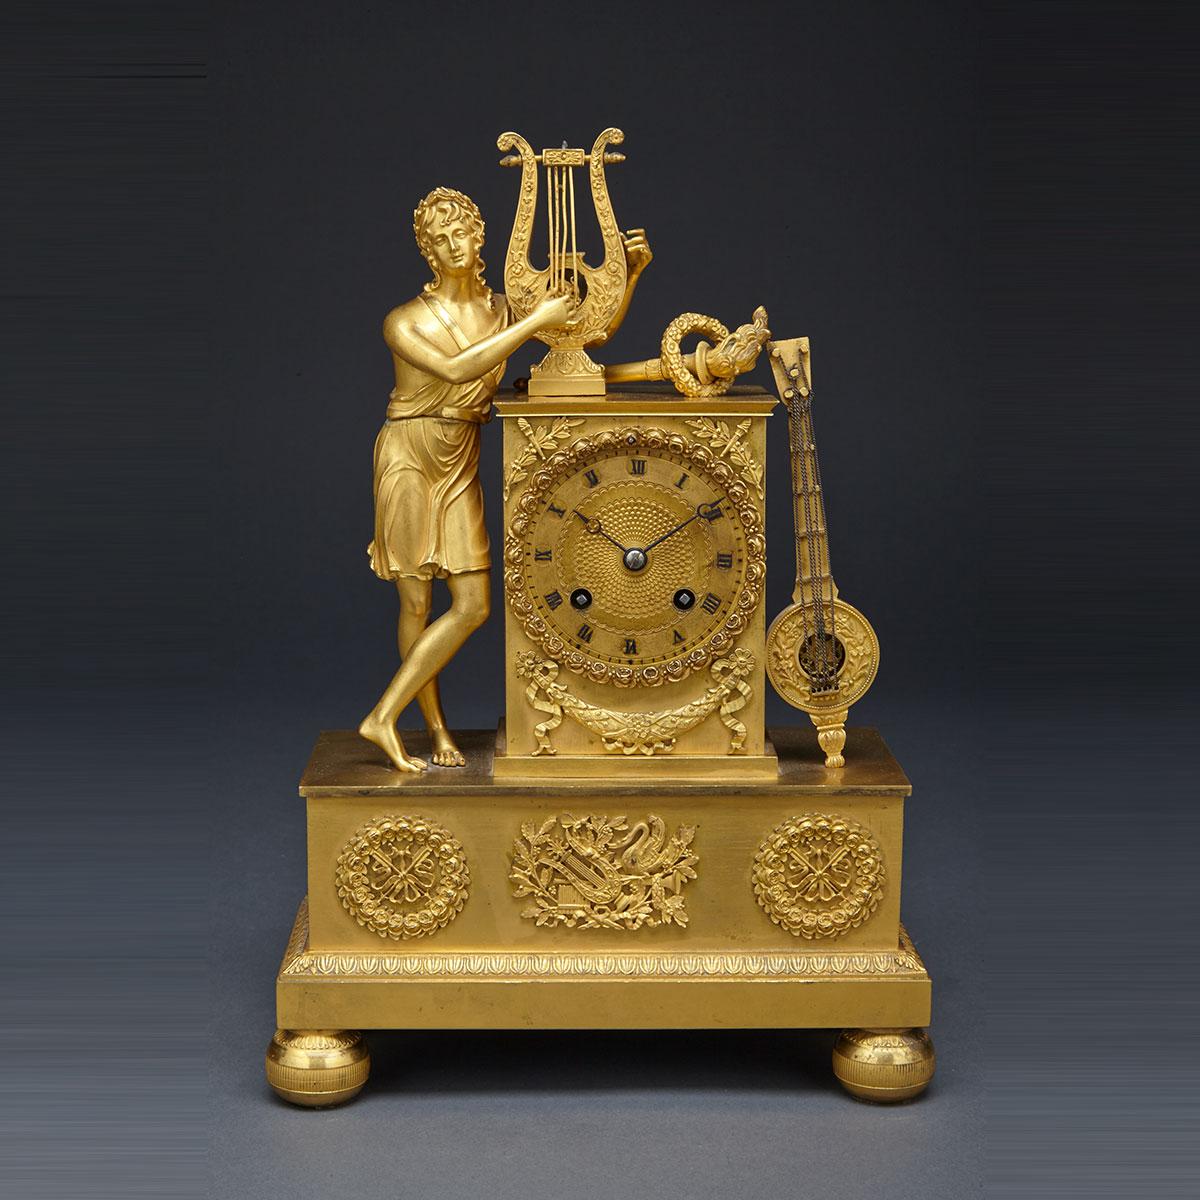 French Empire Gilt Bronze figural mantle clock, early 19th century